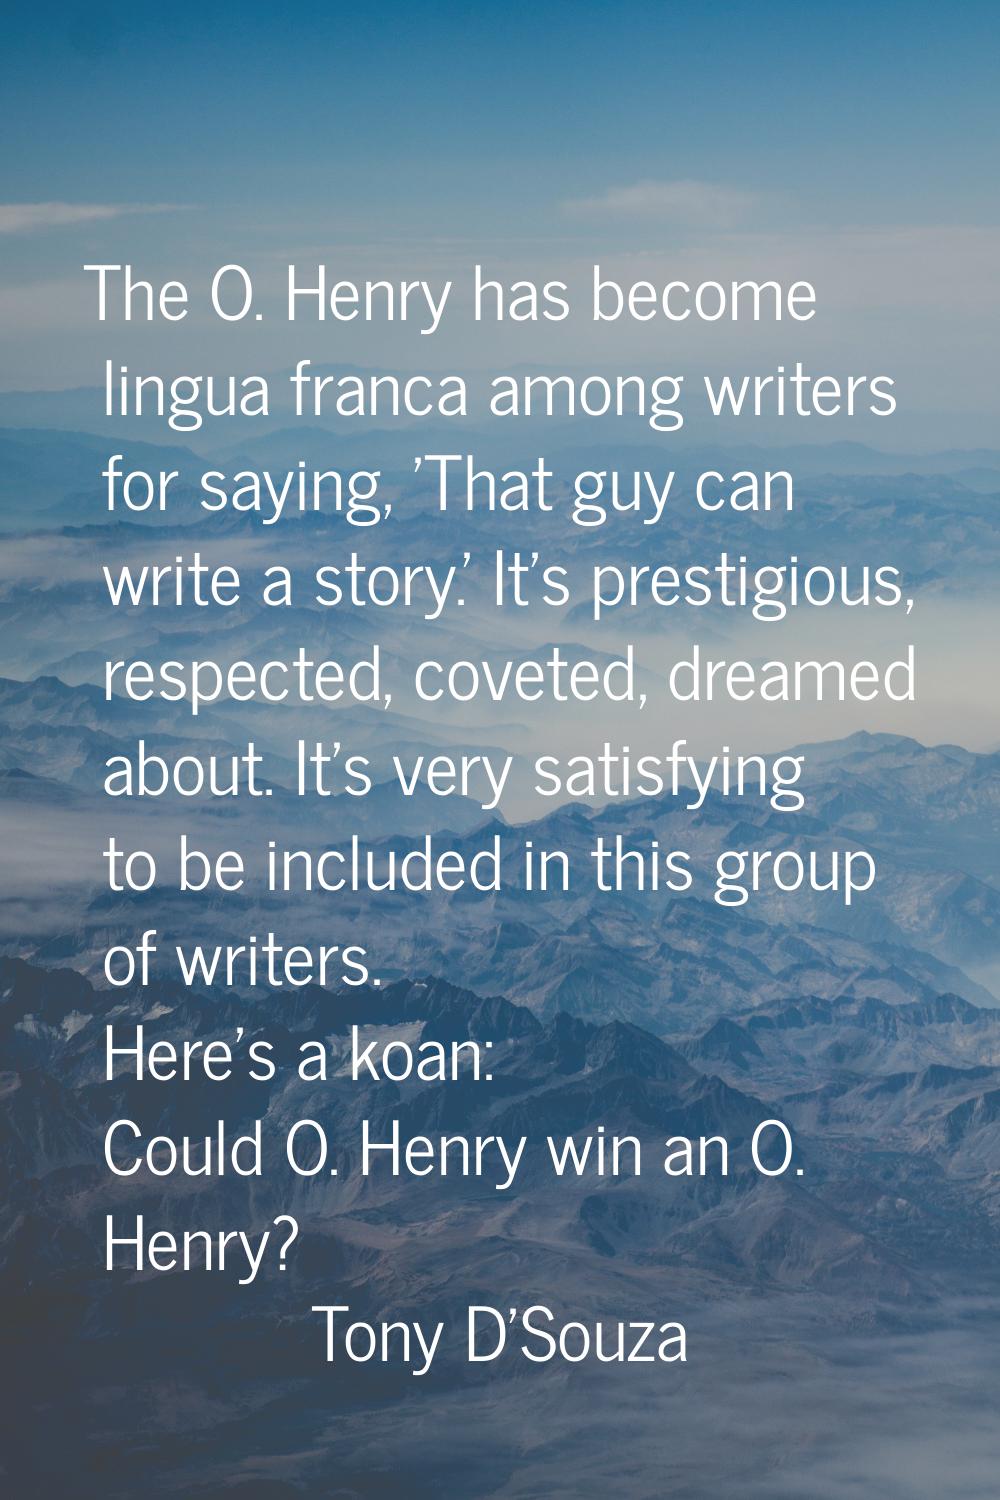 The O. Henry has become lingua franca among writers for saying, 'That guy can write a story.' It's 